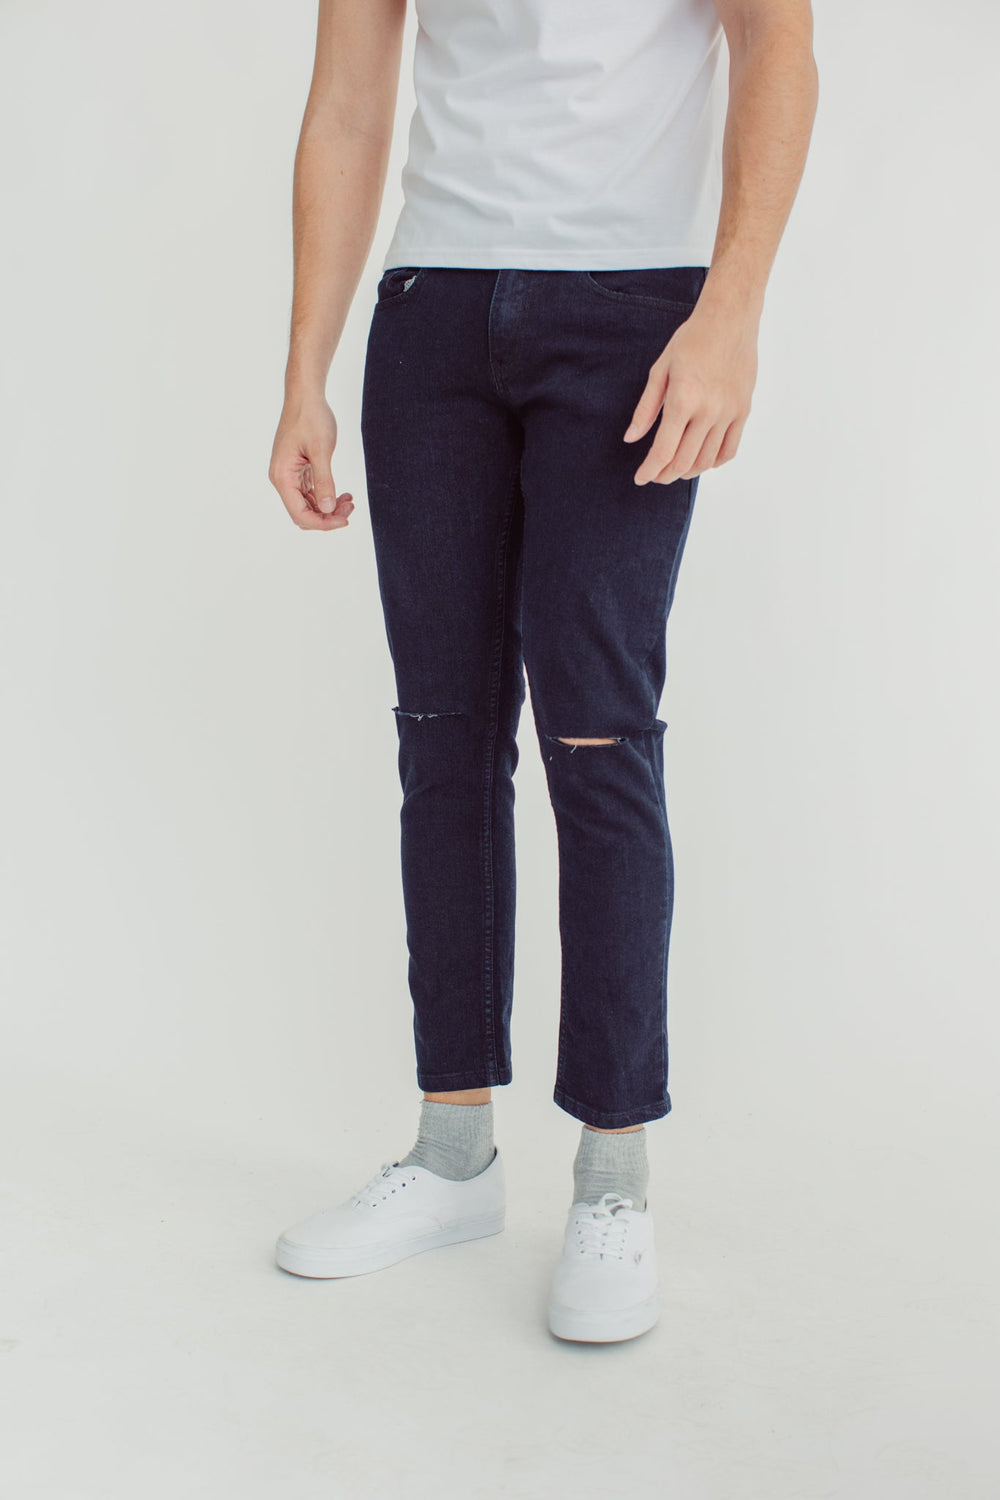 Black Skinny Low Rise Ripped Cropped Jeans - Mossimo PH